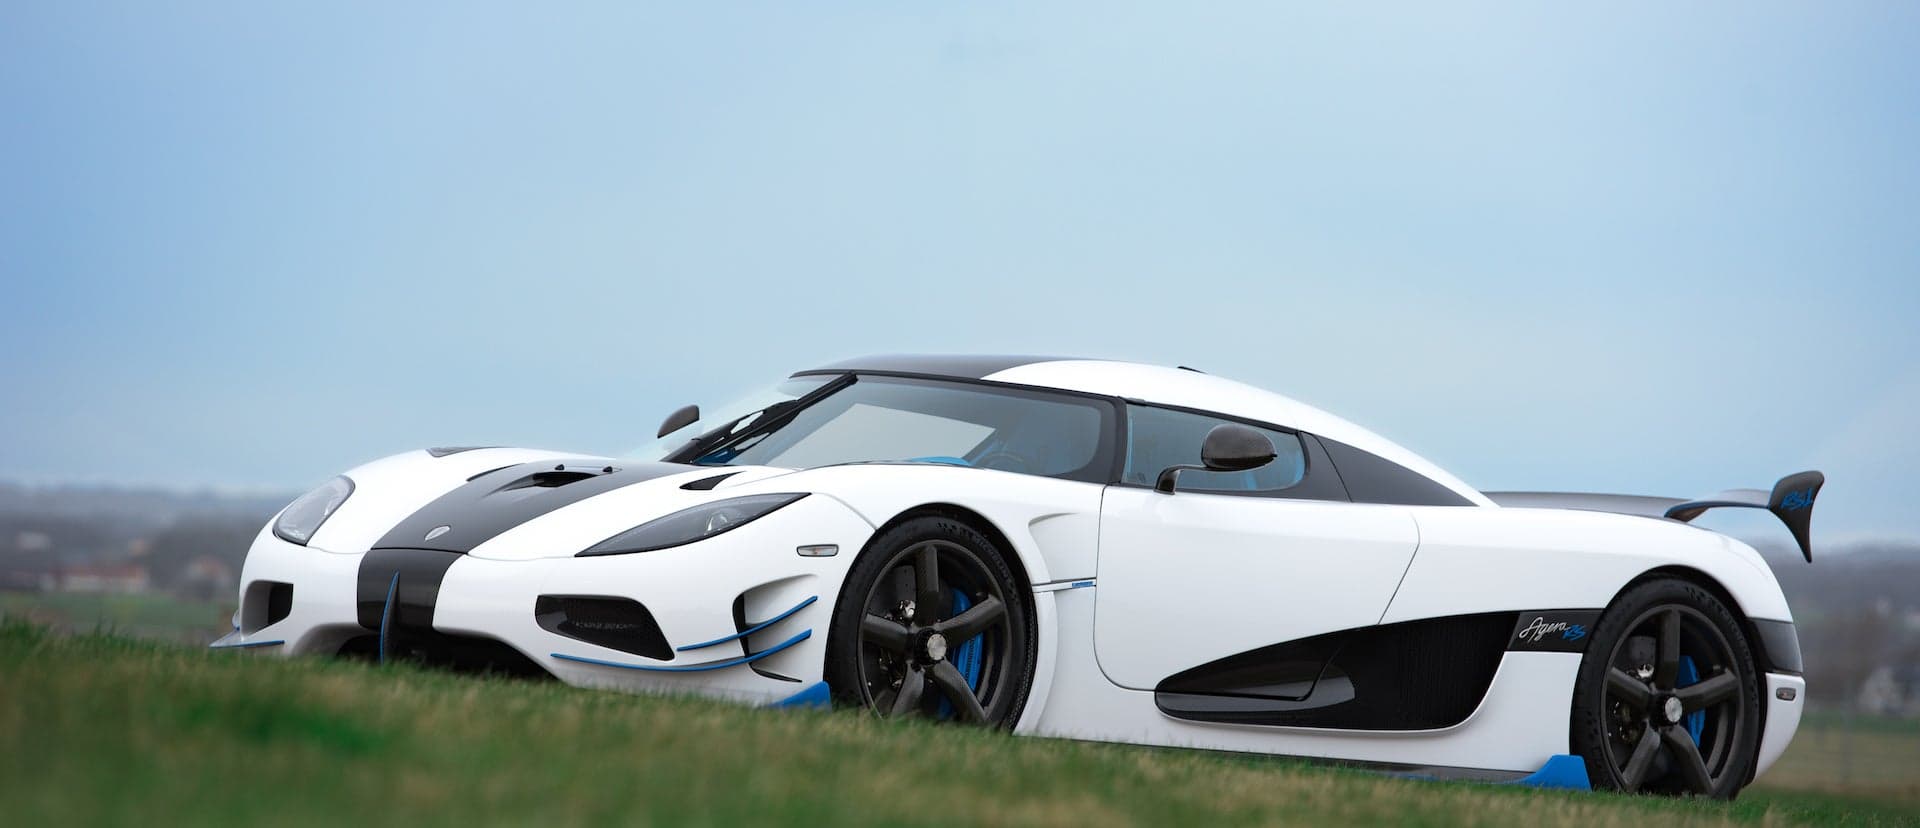 New Koenigsegg Agera RS1 Takes a Bow at New York Auto Show